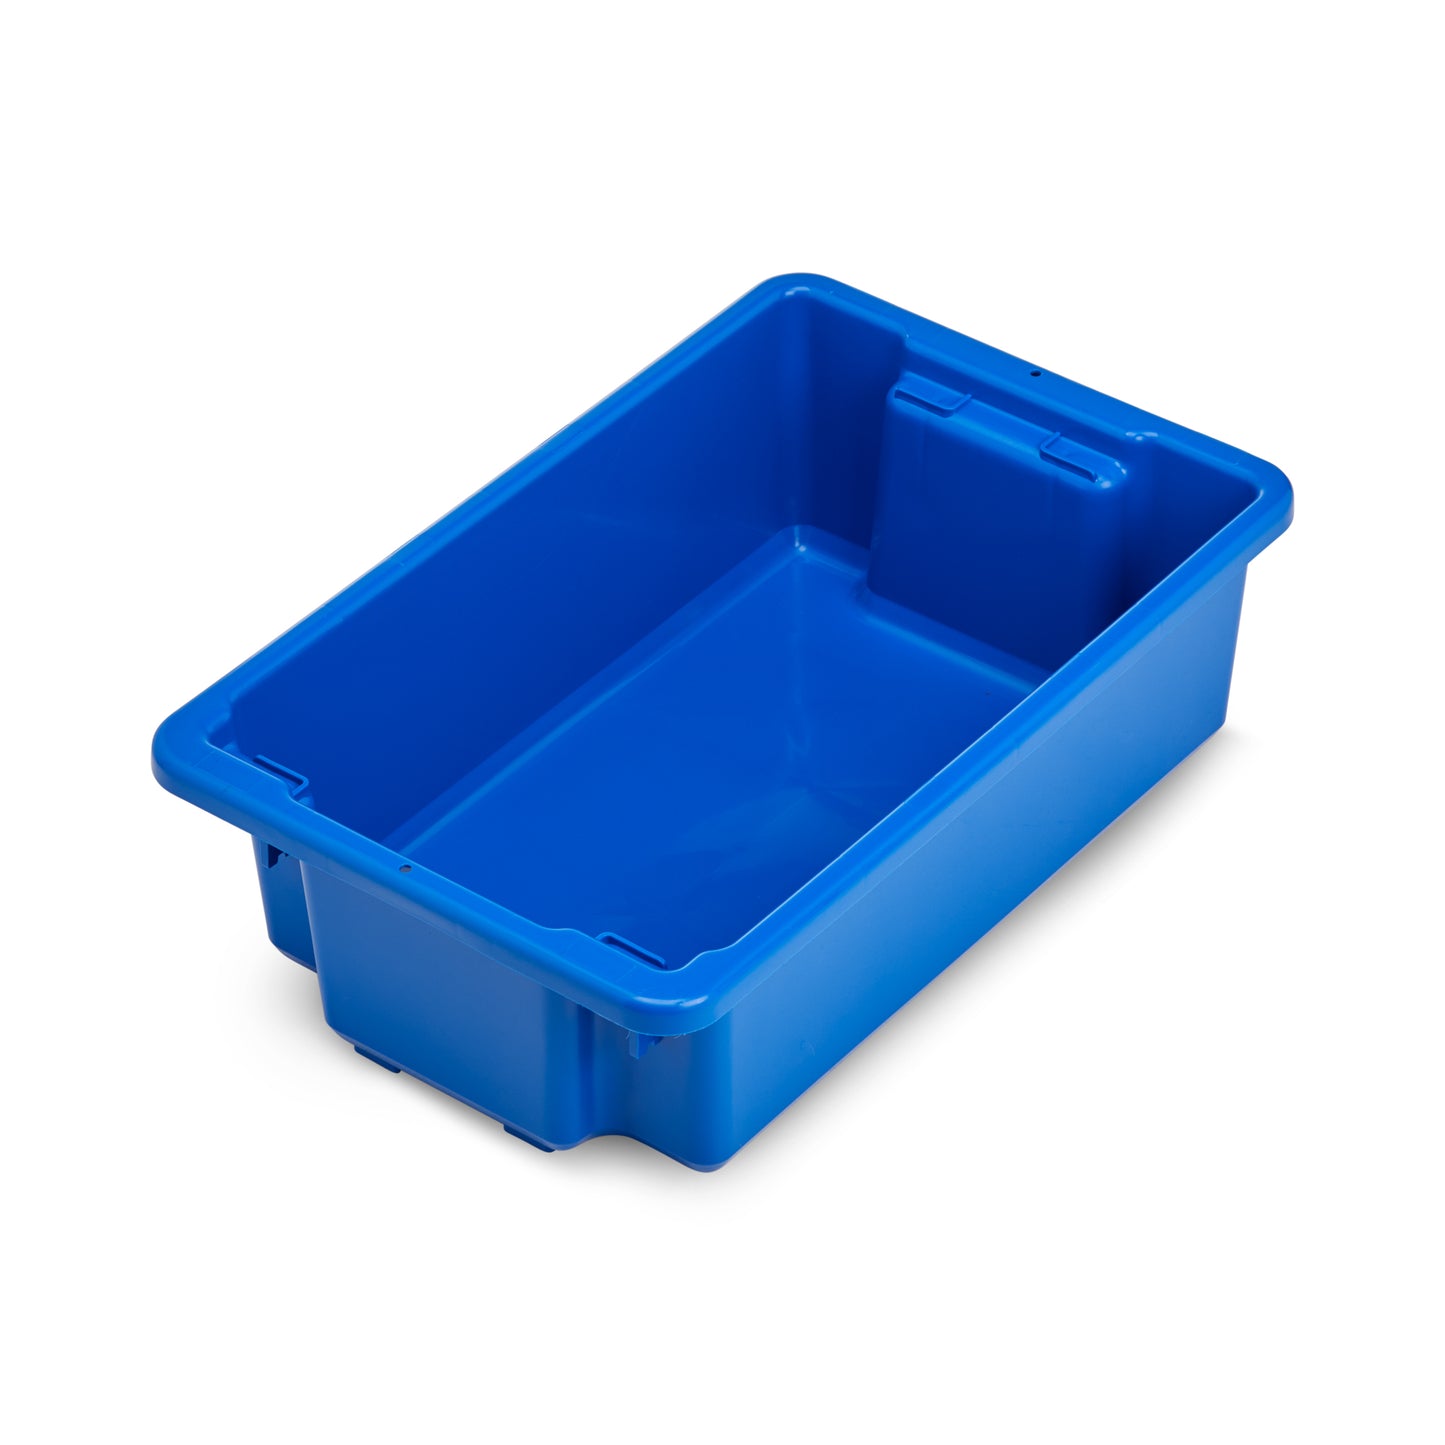 ReadyRack Stor-Tub 32 - 32 Litre Stack and Nest Crate - Blue Pack of 1